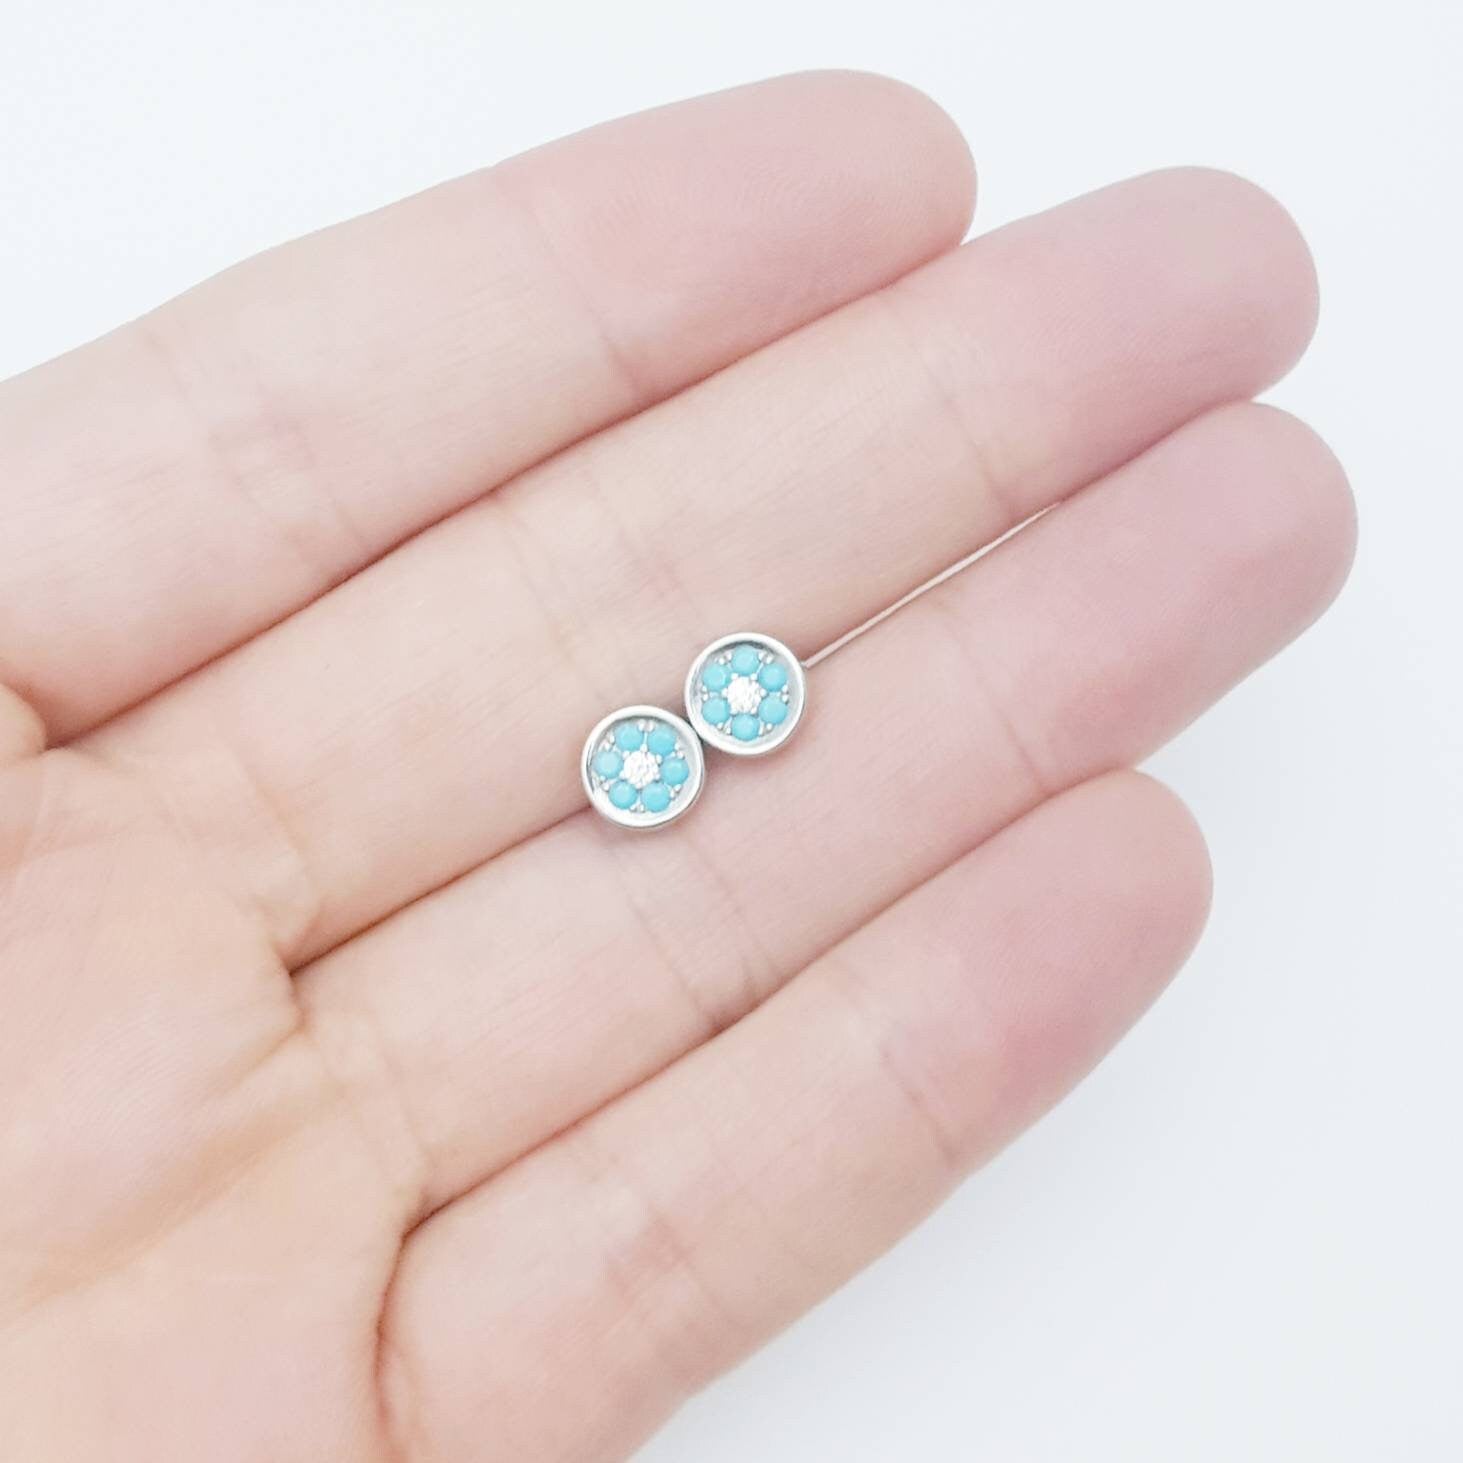 Small round sterling silver turquoise stud earrings, unique blue everyday earrings